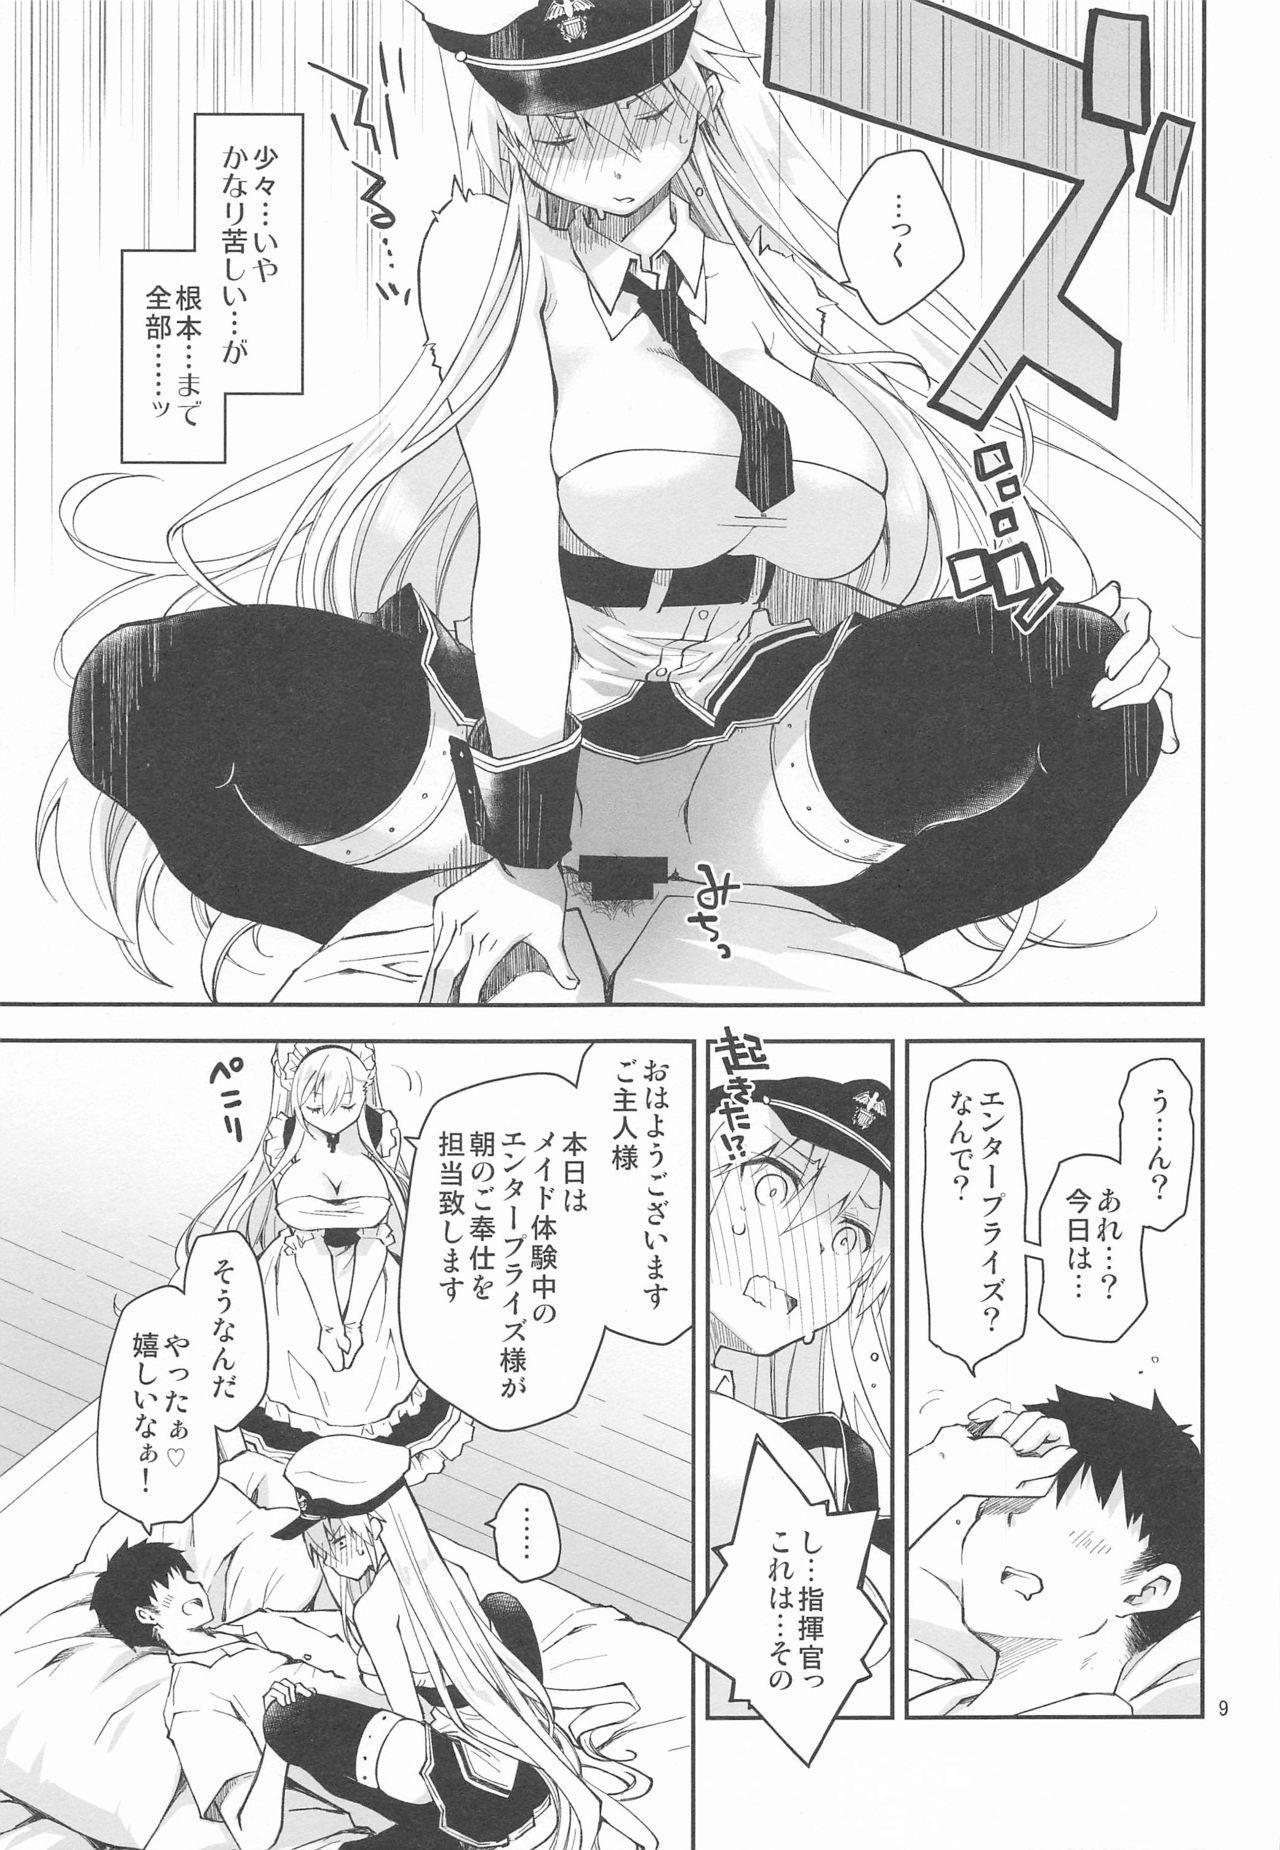 Police Maid in Enterprise - Azur lane Solo Girl - Page 8